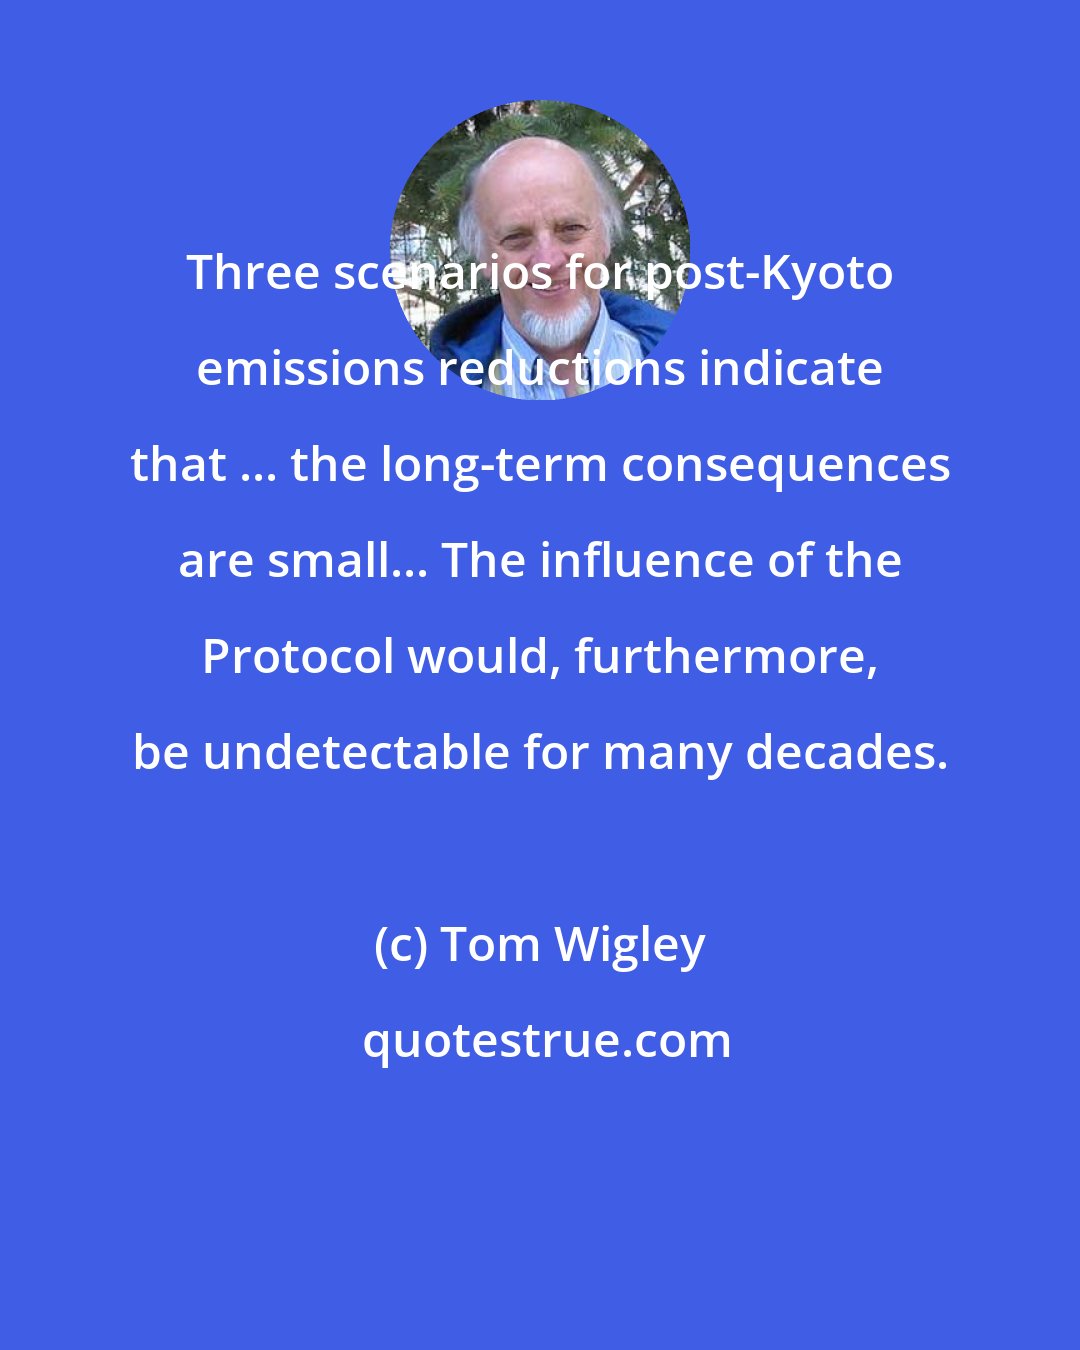 Tom Wigley: Three scenarios for post-Kyoto emissions reductions indicate that ... the long-term consequences are small... The influence of the Protocol would, furthermore, be undetectable for many decades.